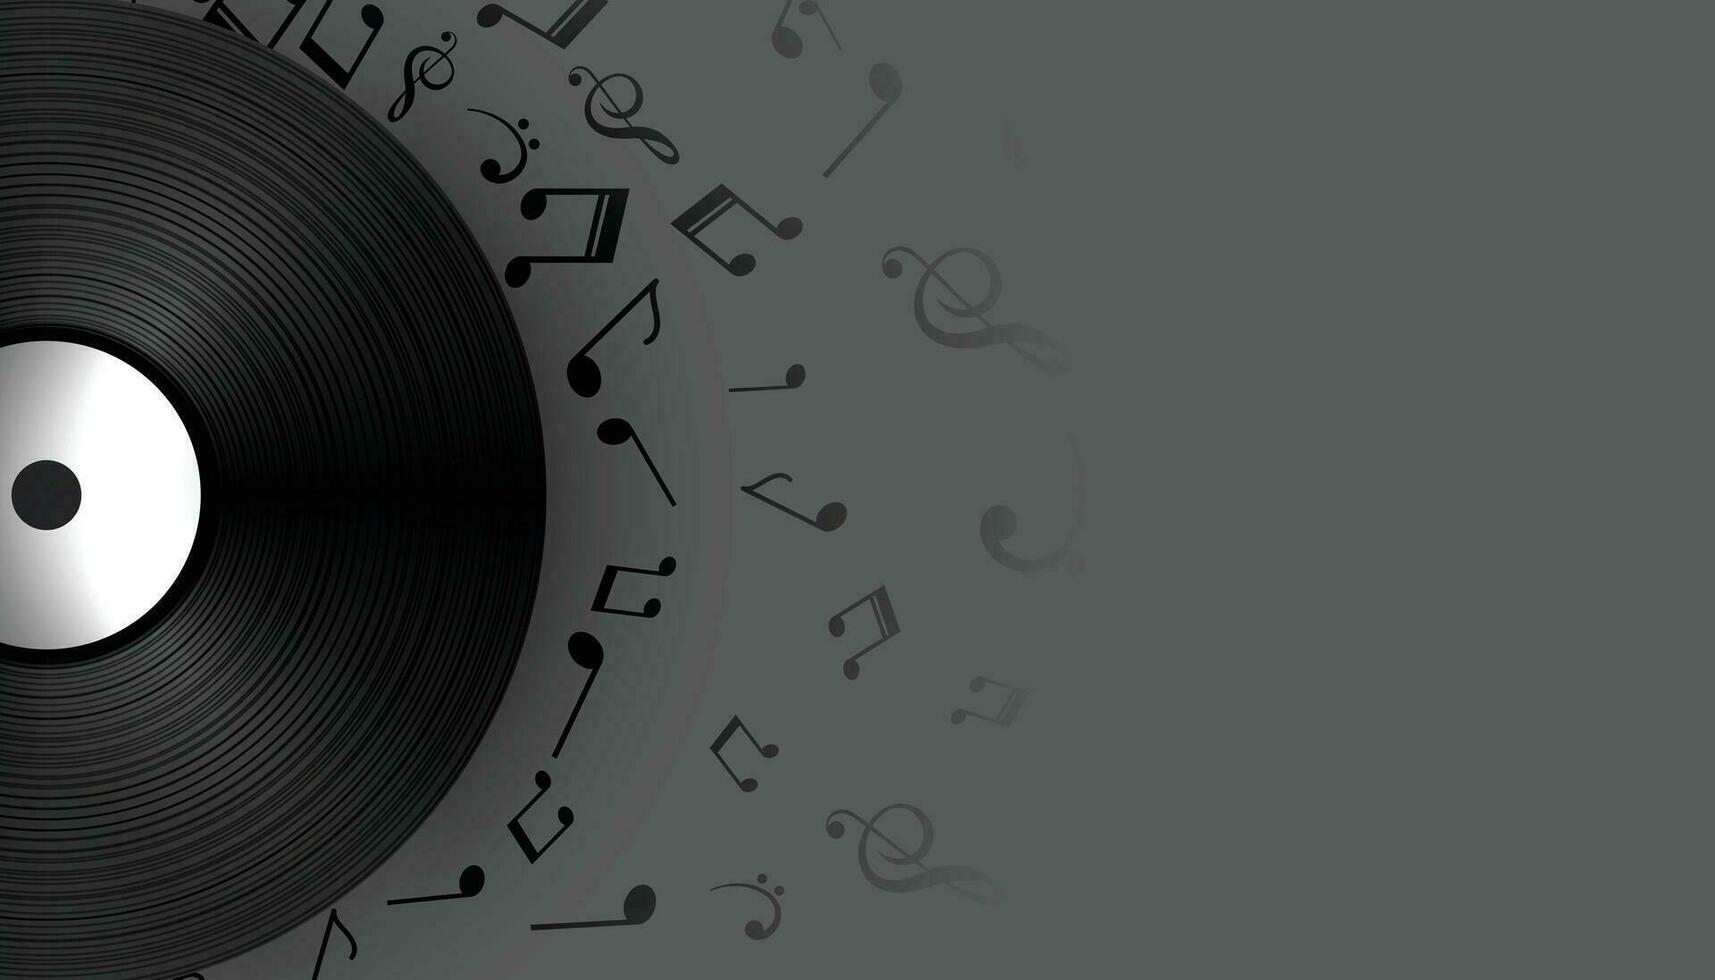 music vinyl record label with sound notes vector